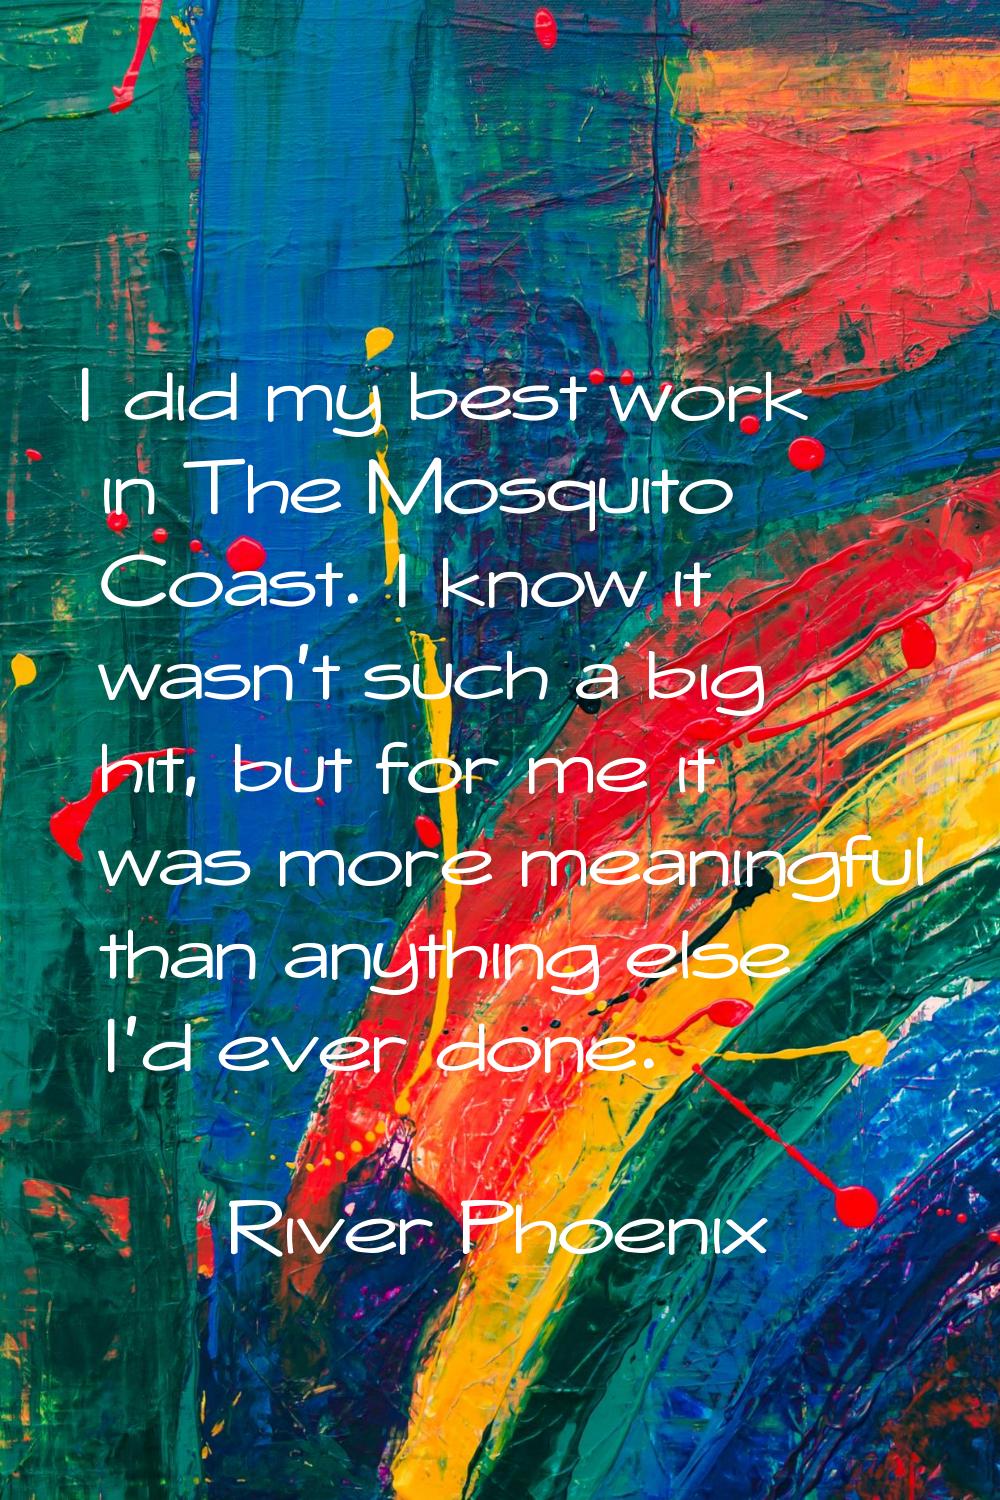 I did my best work in The Mosquito Coast. I know it wasn't such a big hit, but for me it was more m